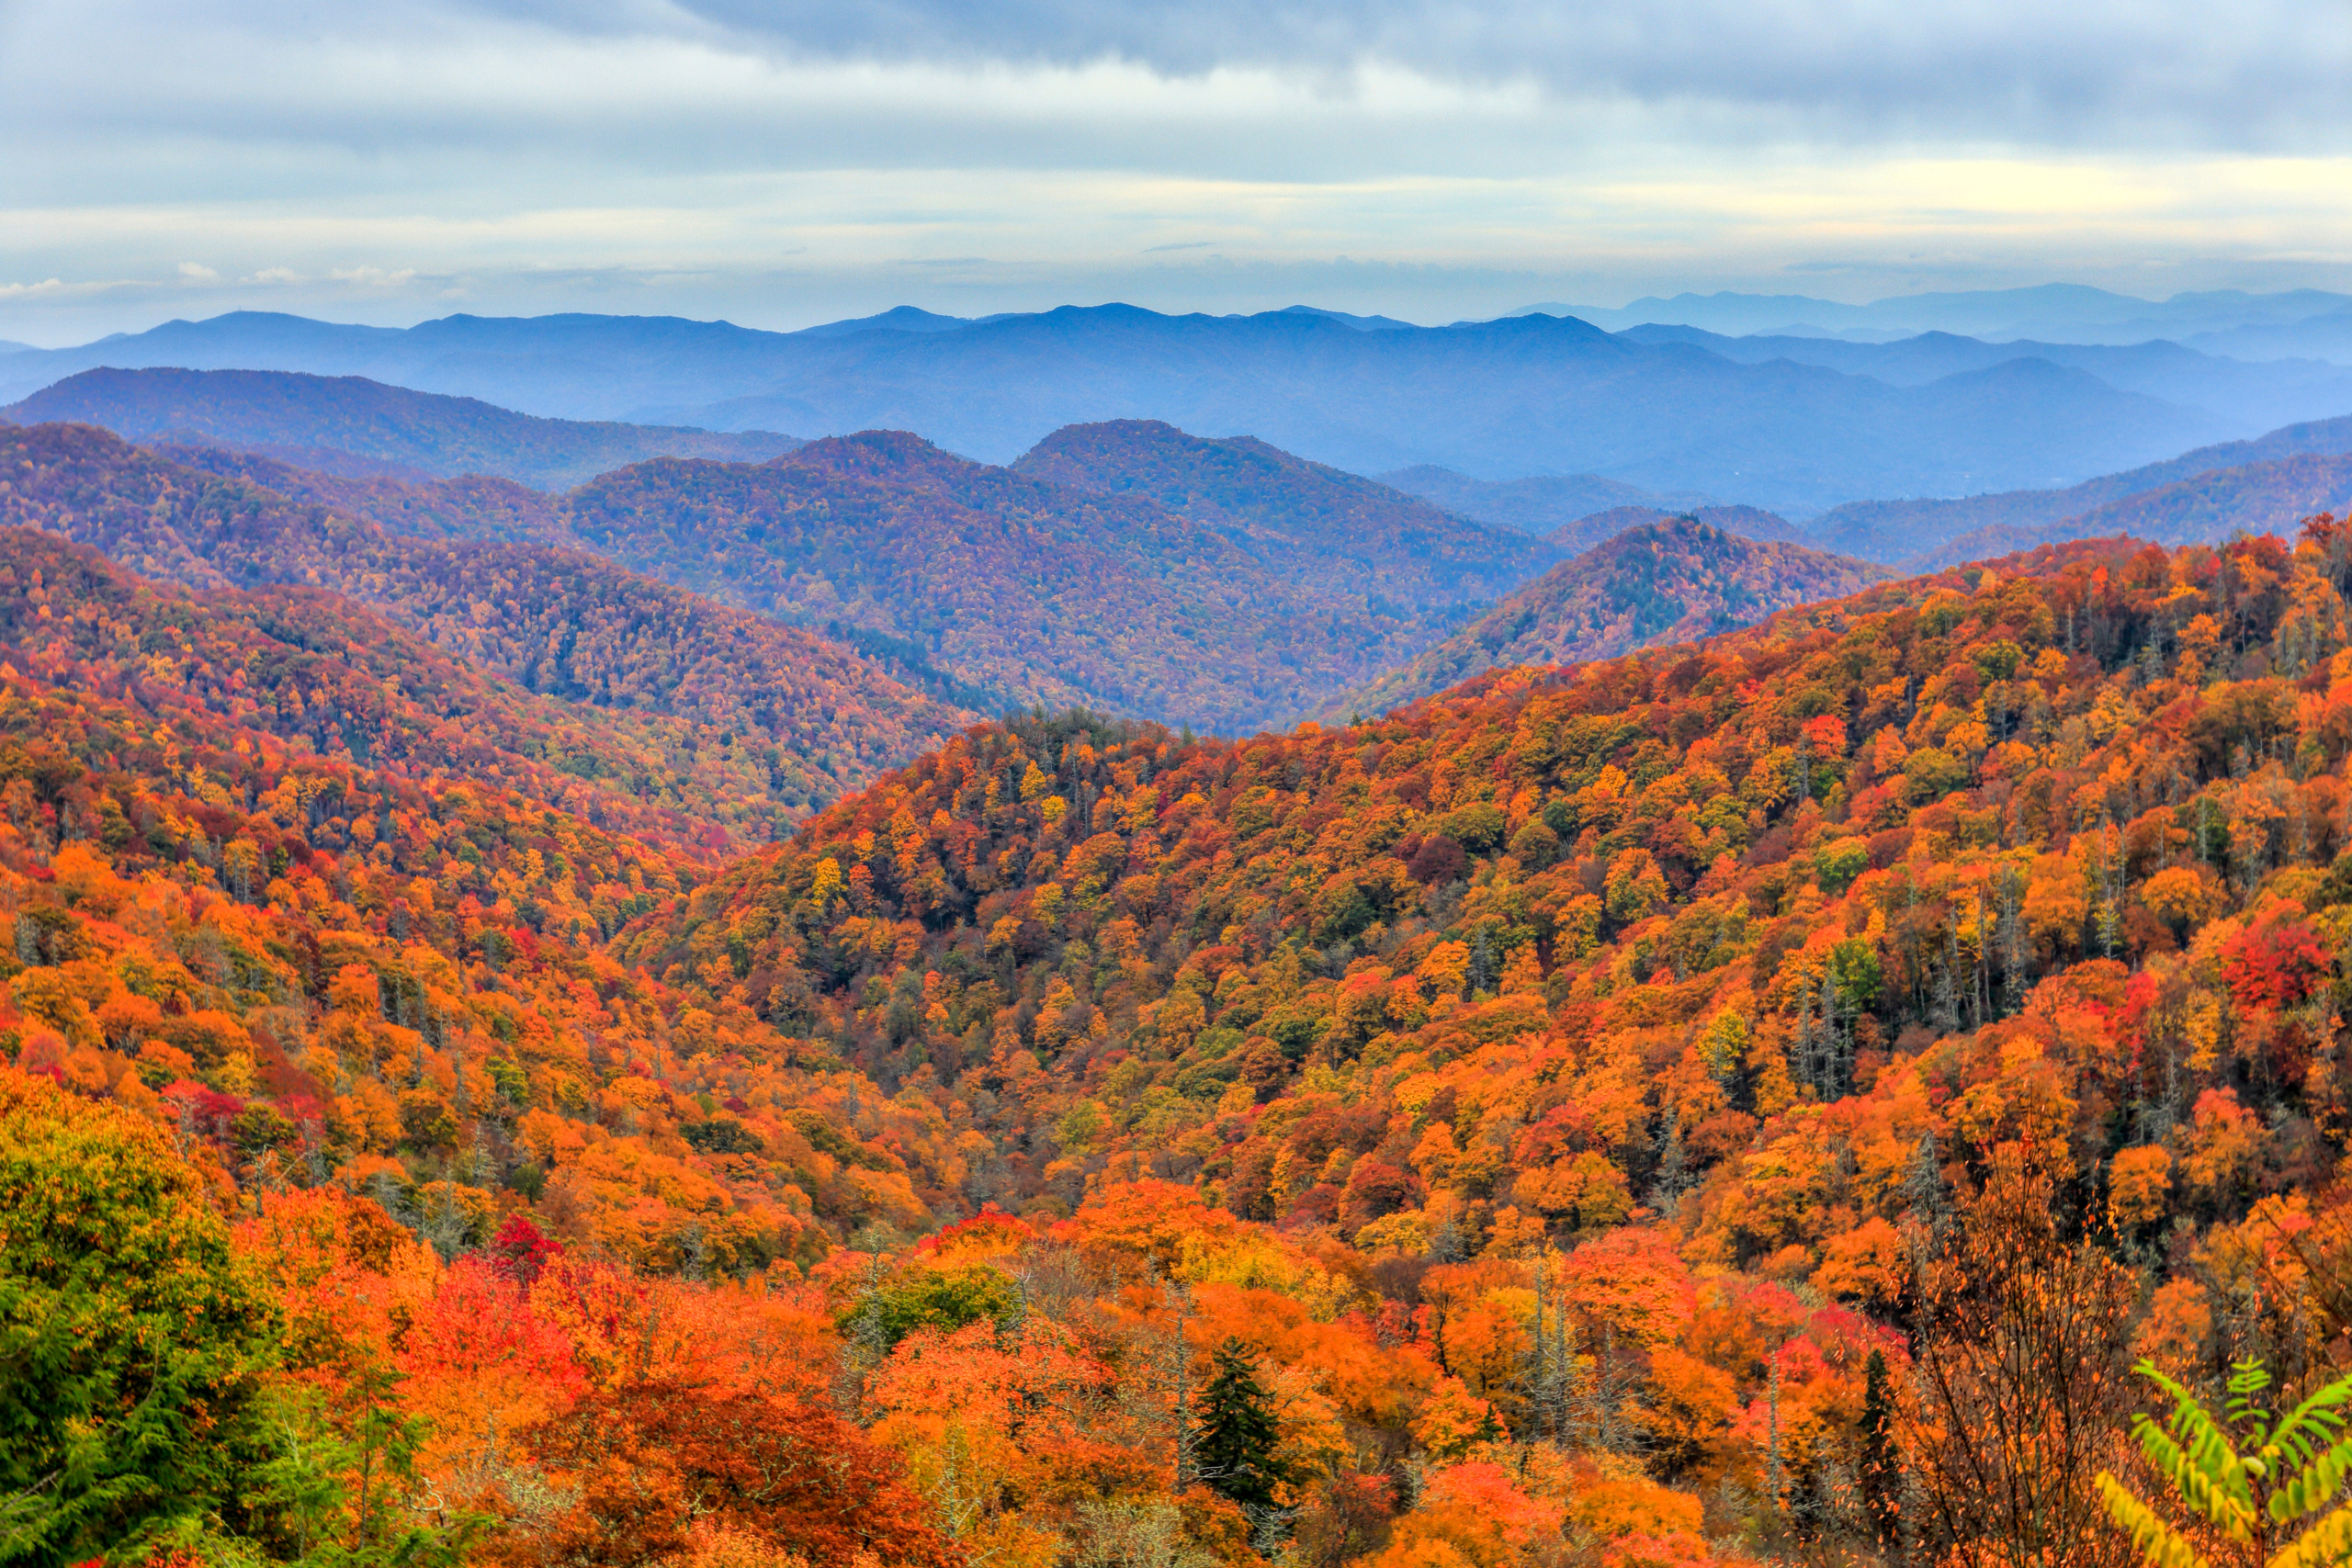 Fall foliage in the Great Smoky Mountains.